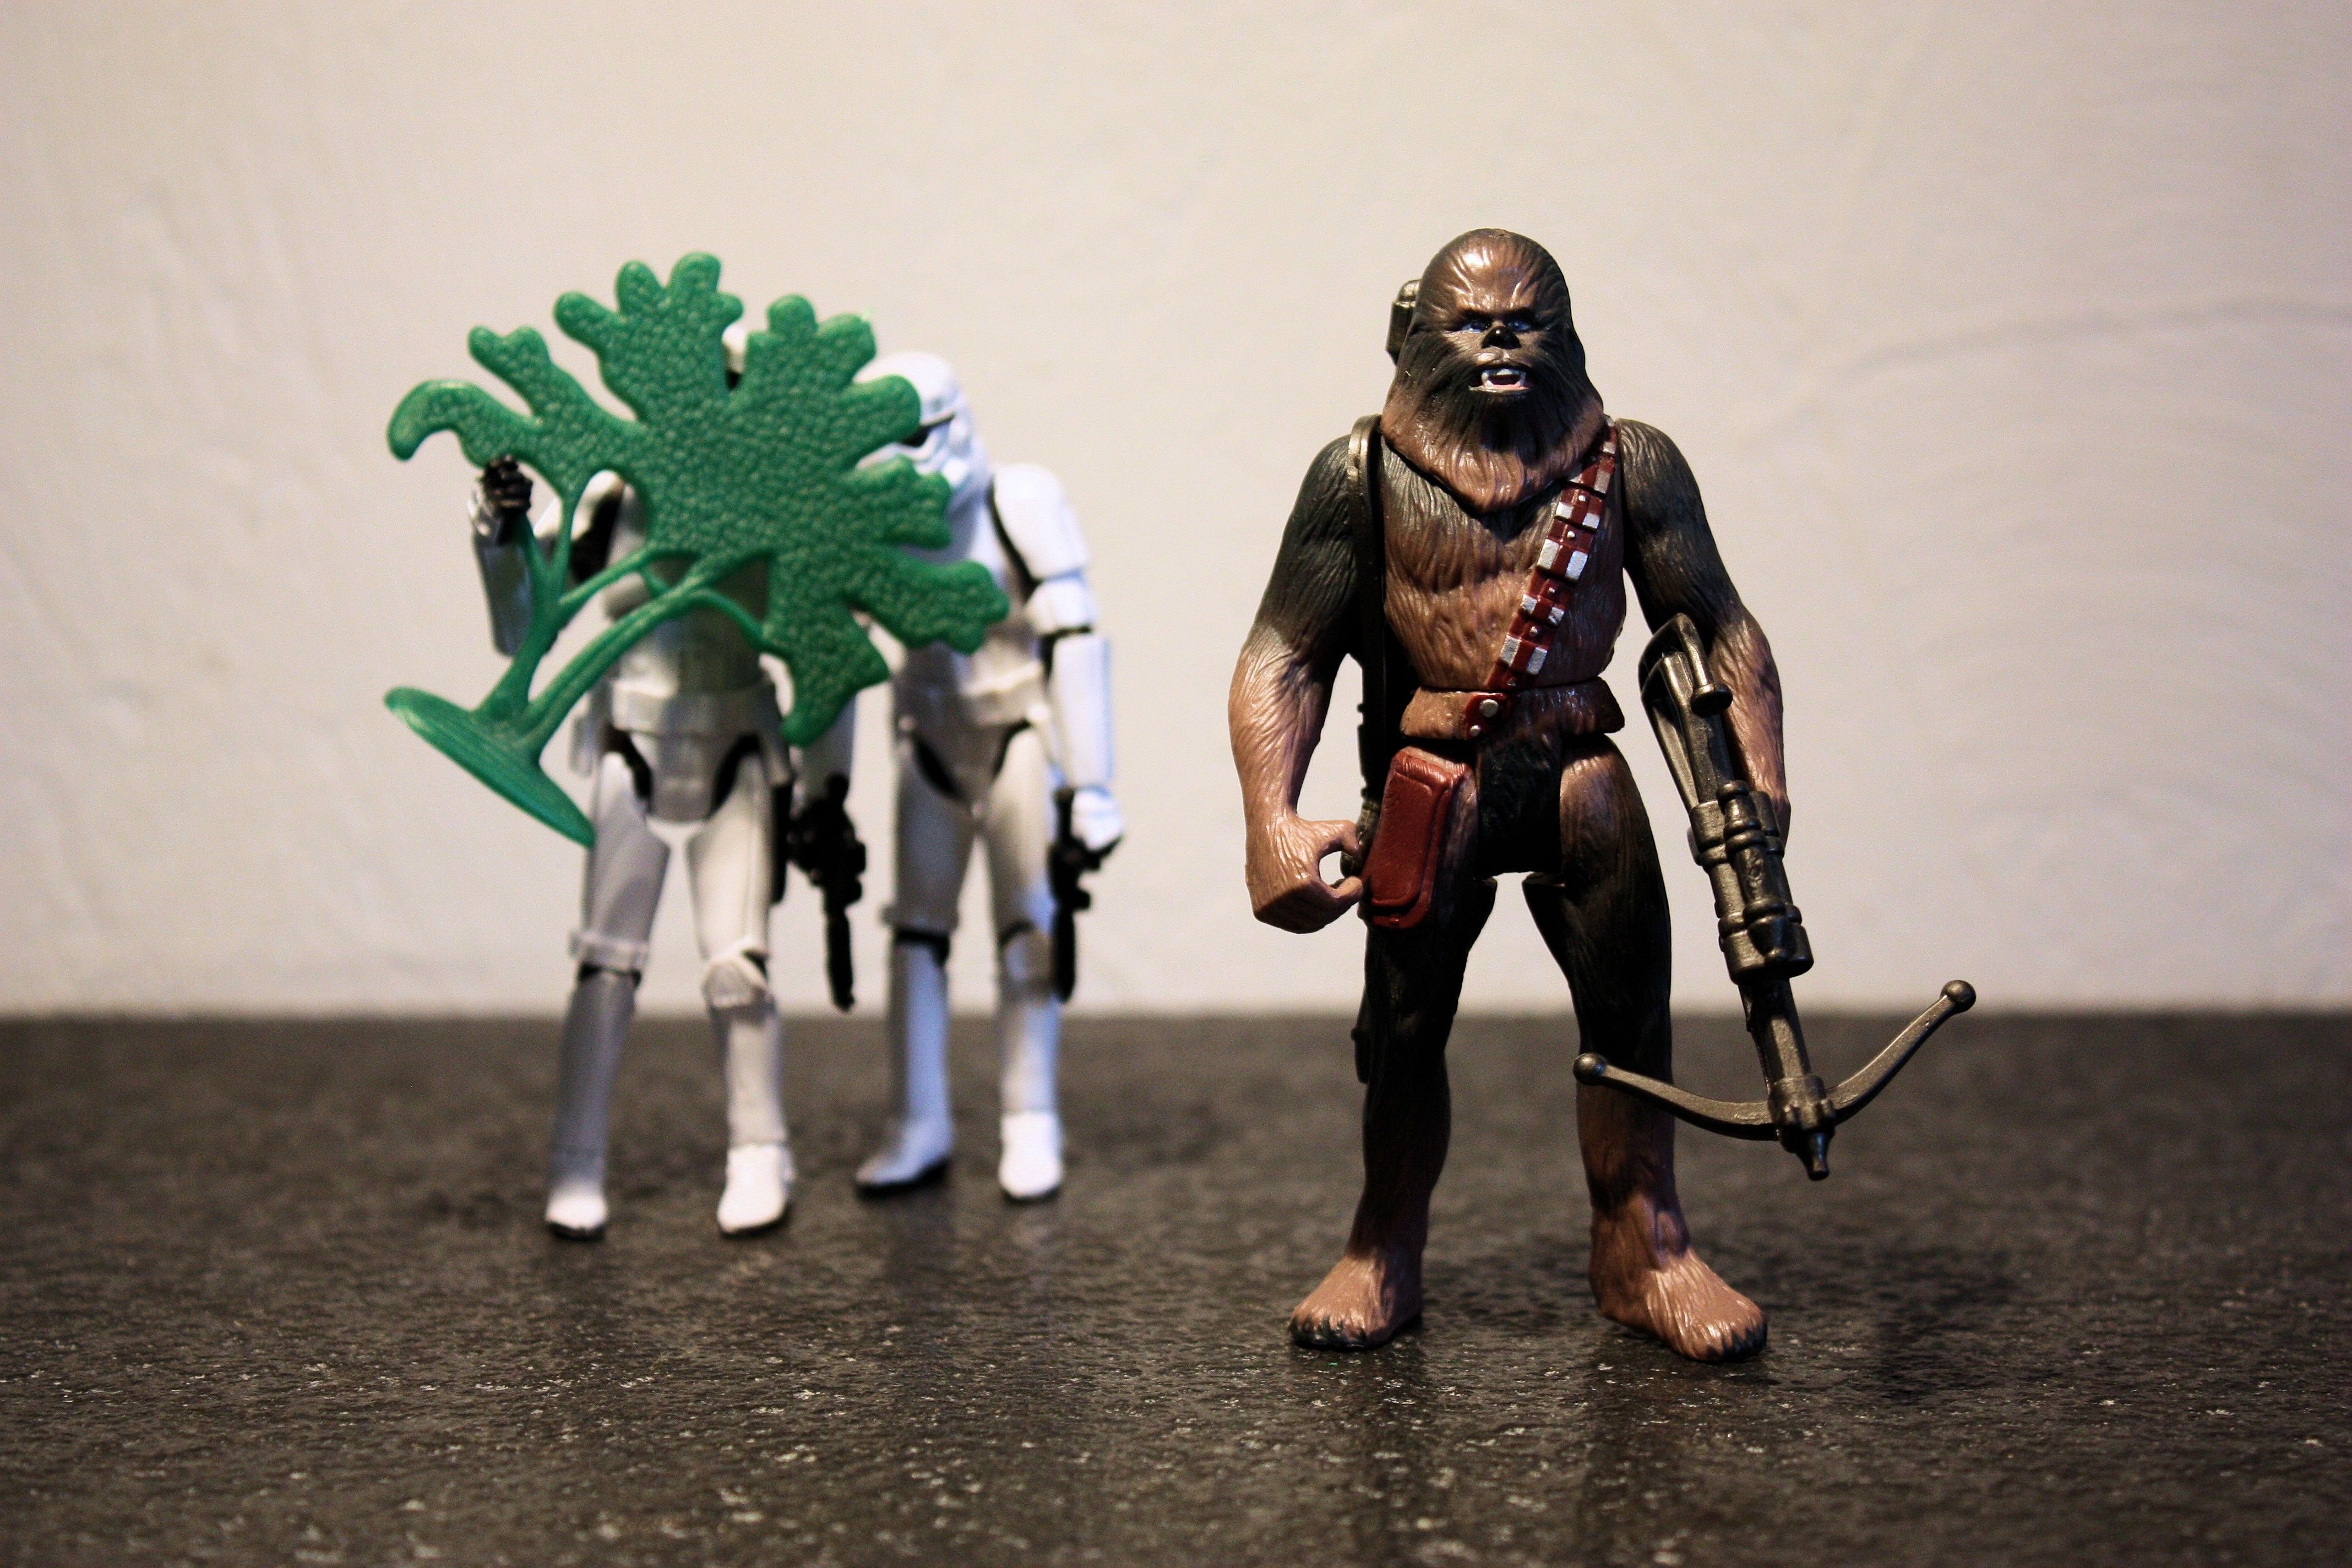 figurines, miniature, Chewbacca, puppets, action figures